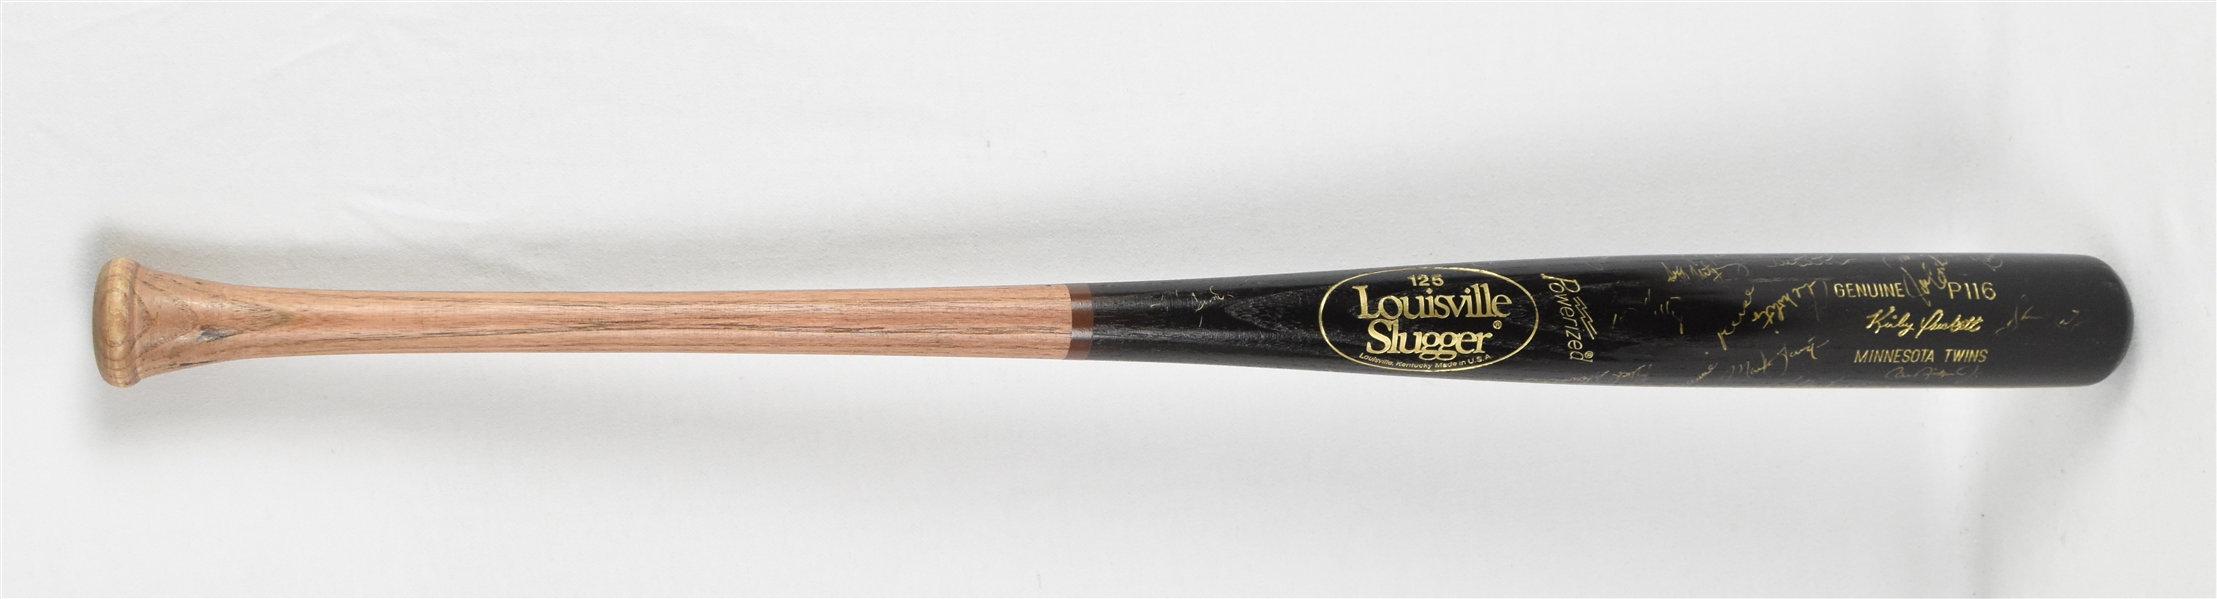 Kirby Puckett 1992 Minnesota Twins Game Used Bat Signed by 1992 All Star Team